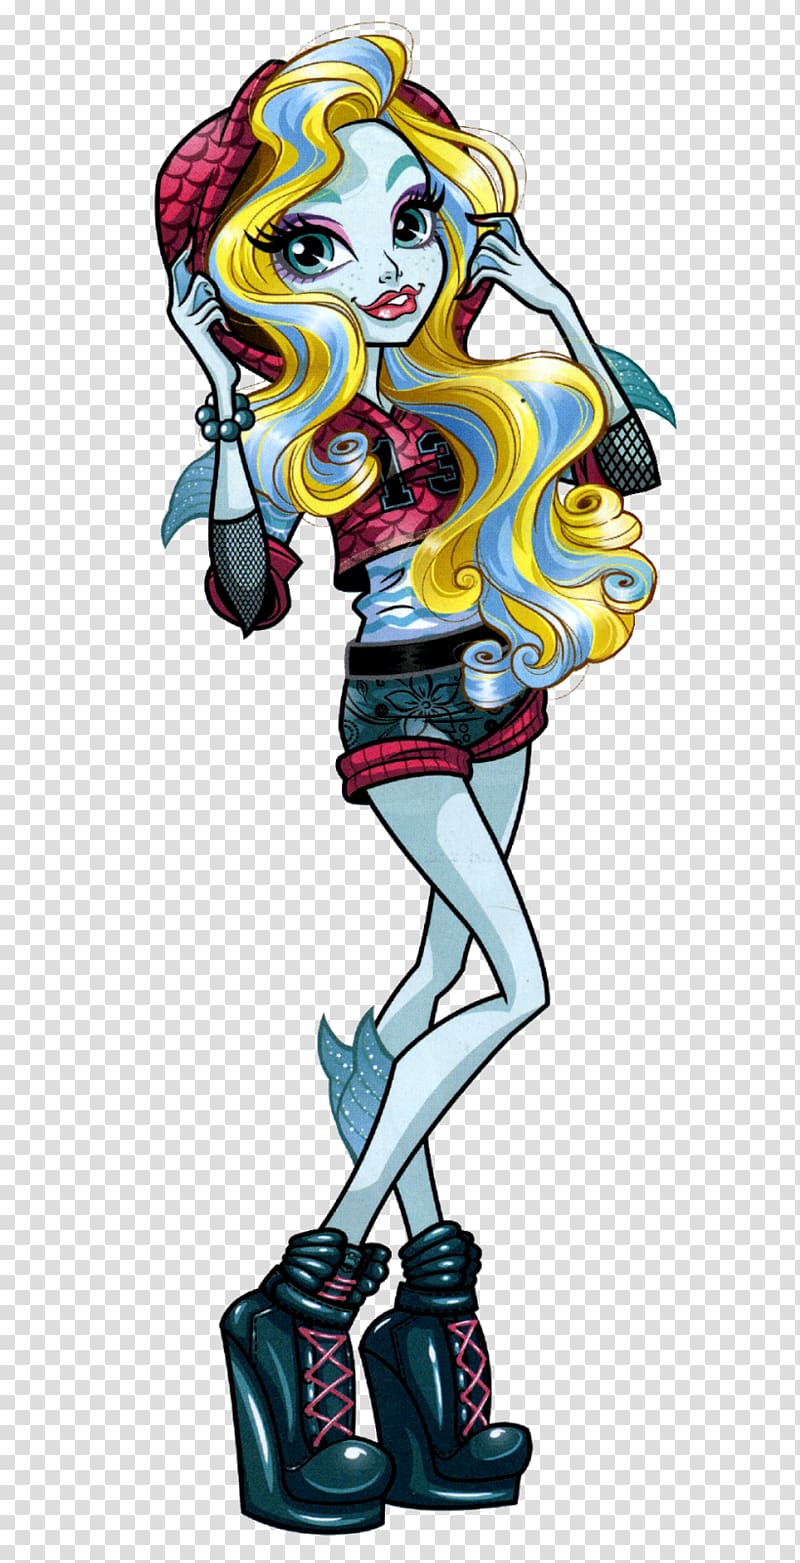 Lagoona Blue Cleo DeNile Draculaura Monster High Doll, Mo nsterhigh transparent background PNG clipart